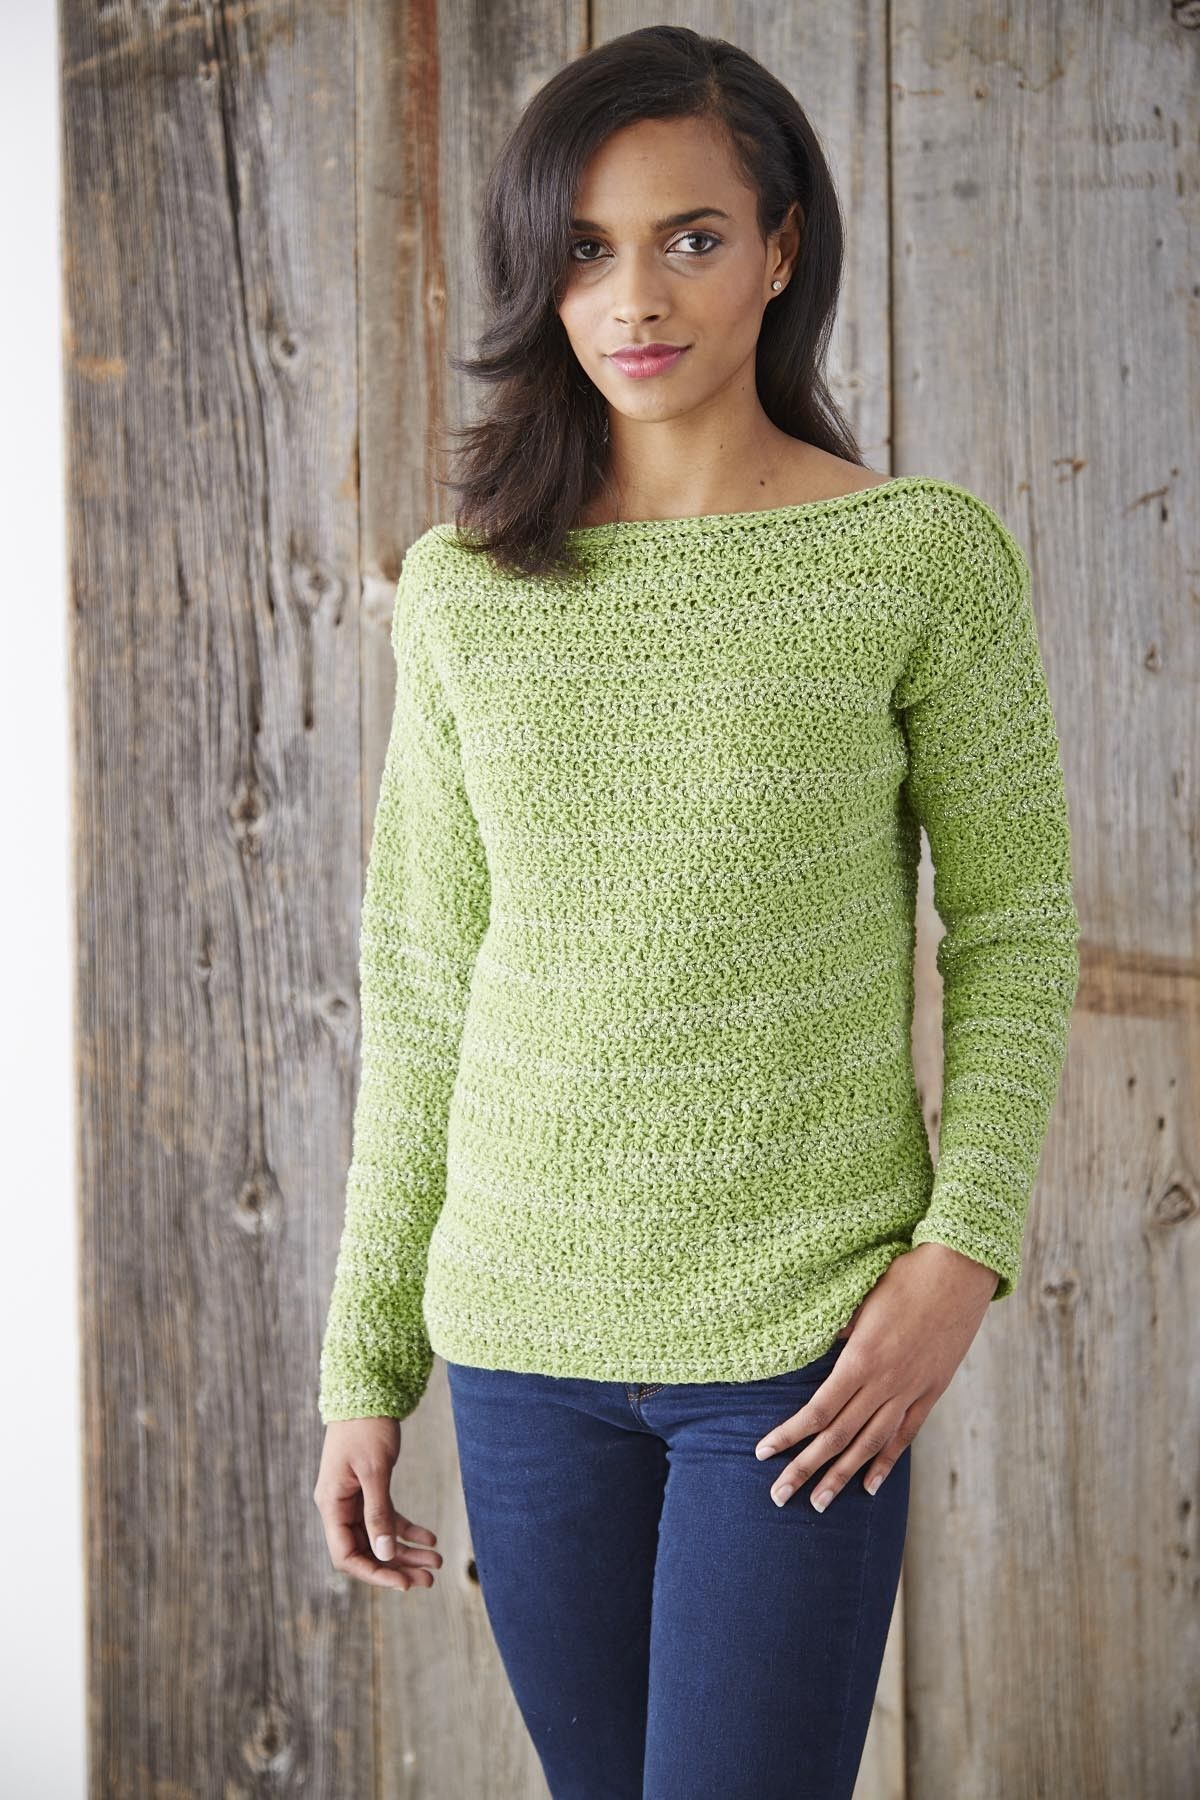 Easy Free Crochet Sweater Patterns Boat Neck Pullover Sweater Crafts Crochet Knitting Both Paid